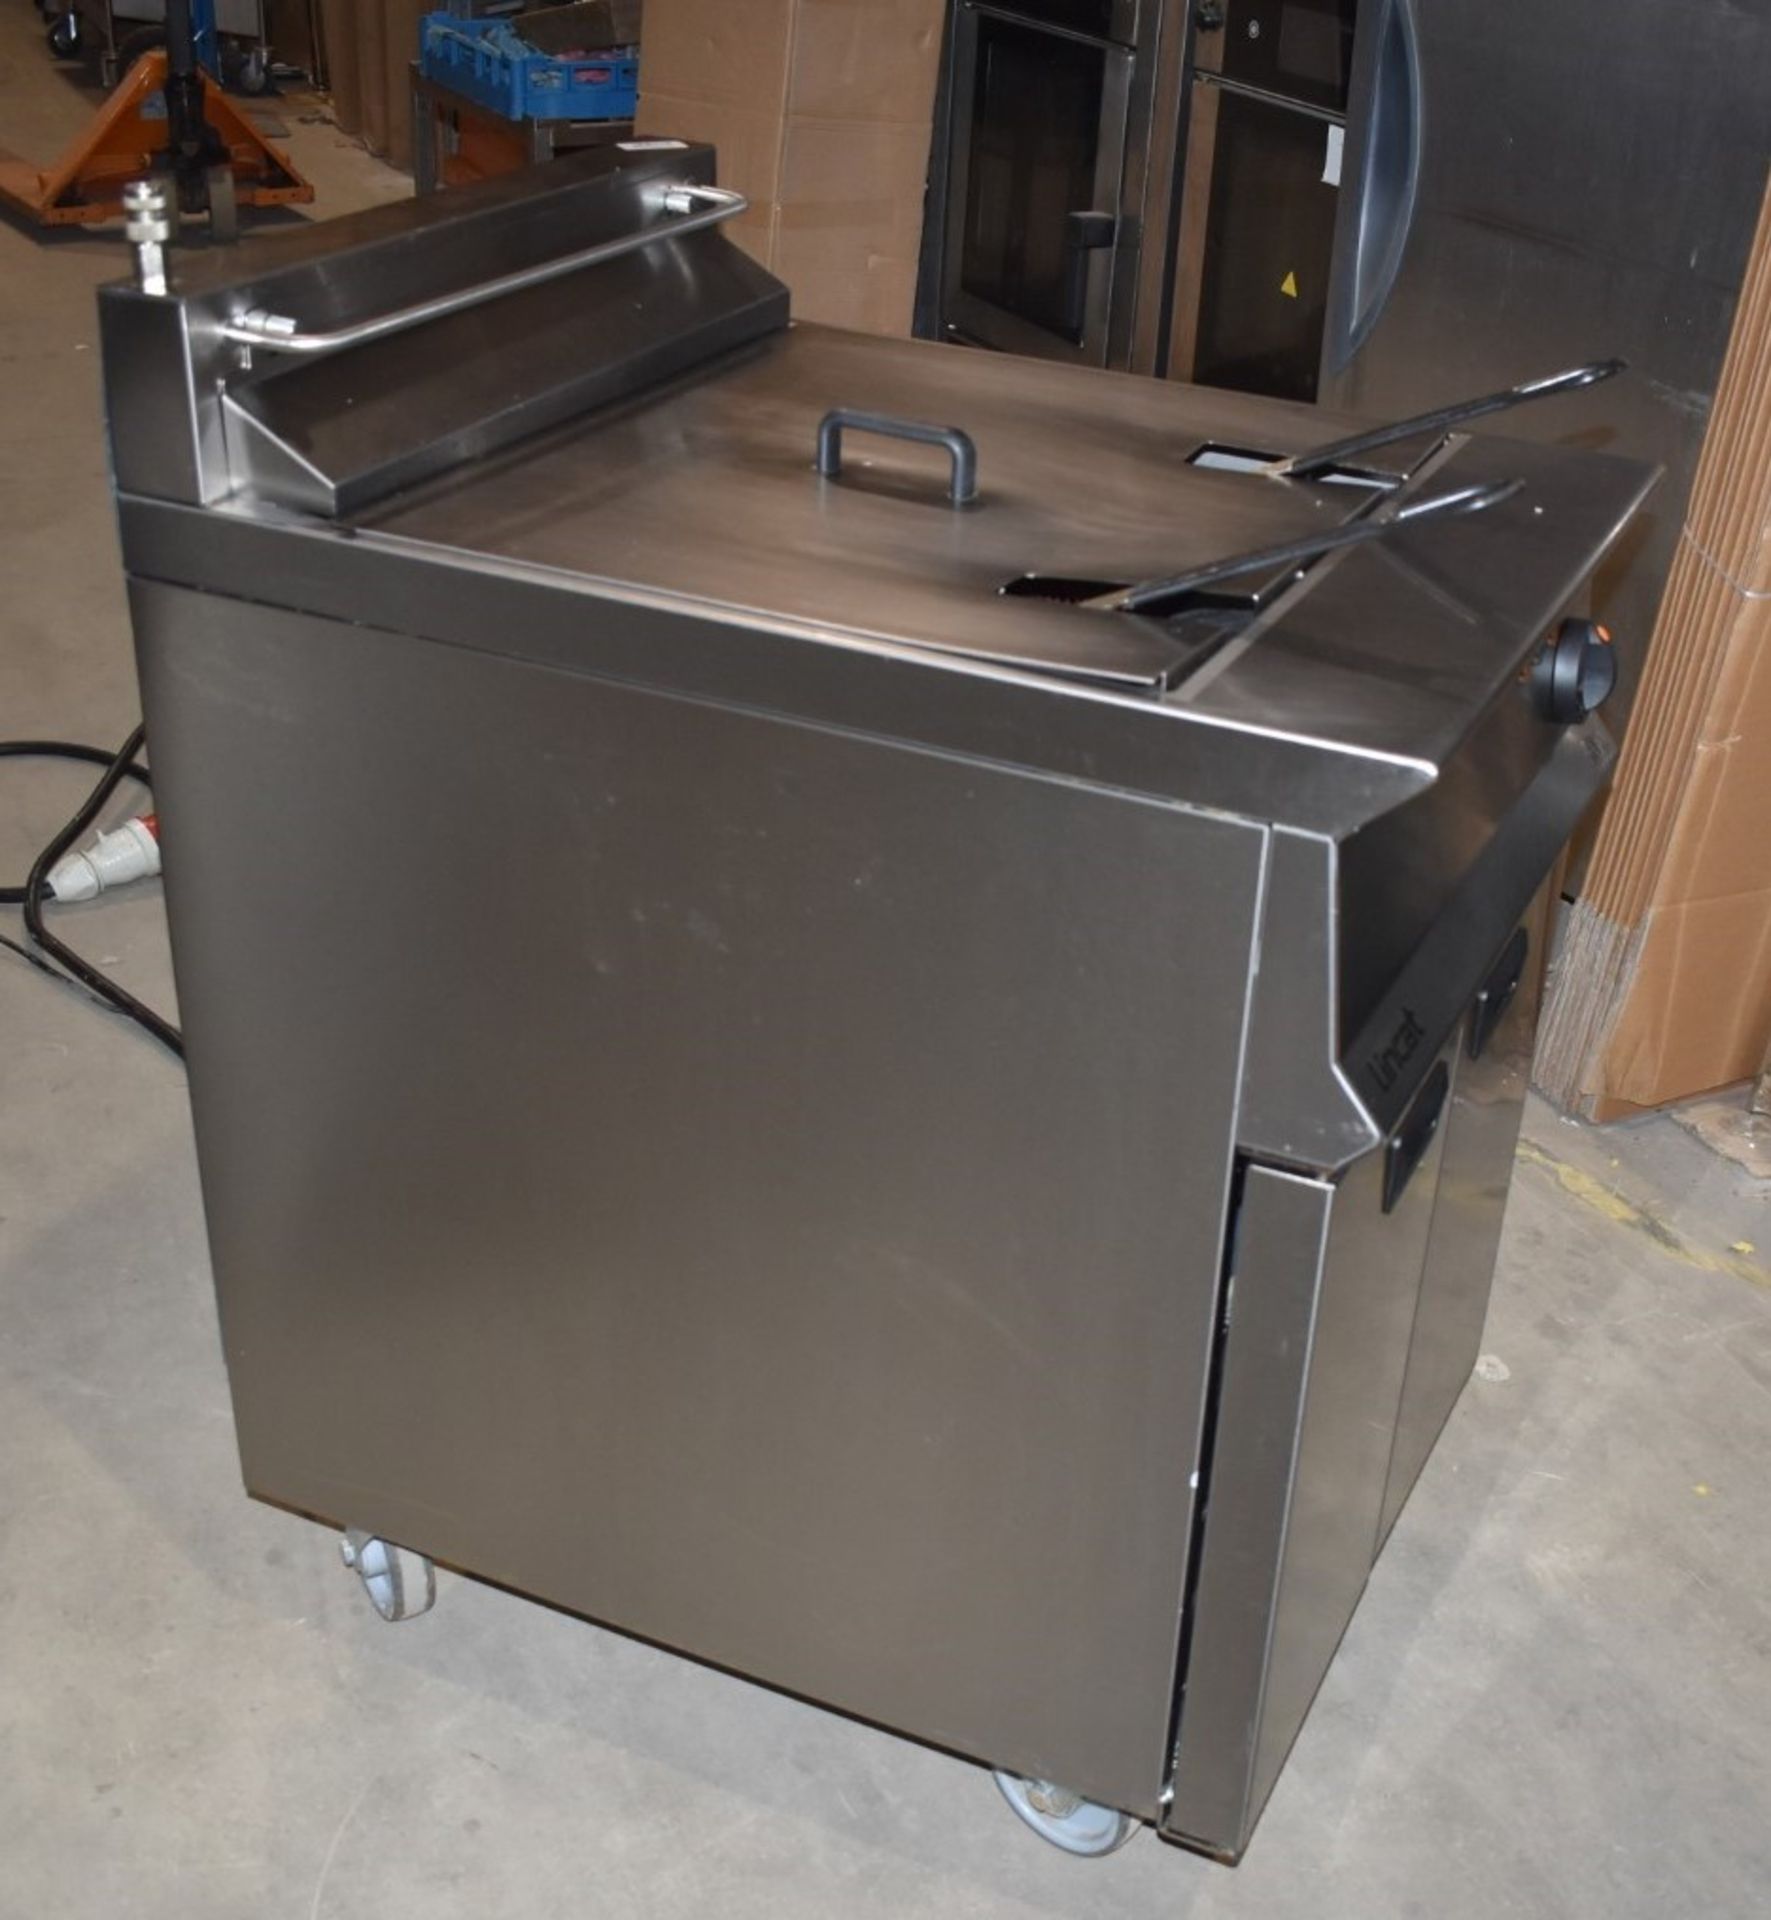 1 x Lincat Opus 800 OE8108 Single Tank Electric Fryer With Filtration - 37L Tank With Two Baskets - - Image 9 of 14